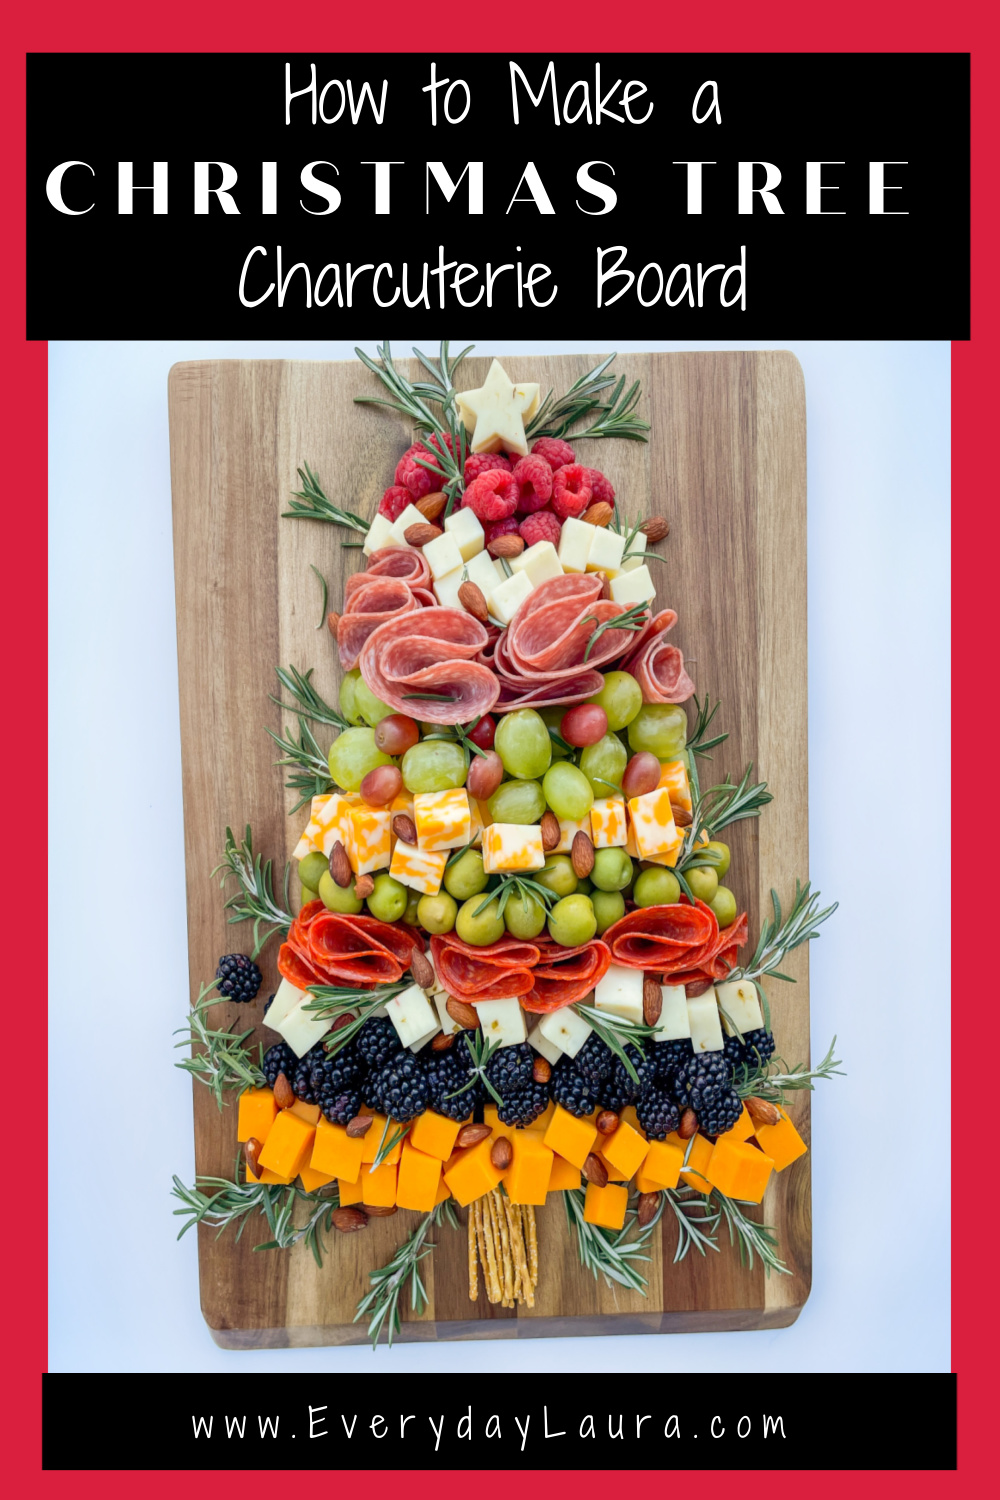 How to Transport Charcuterie Board: Travel Charcuterie Board